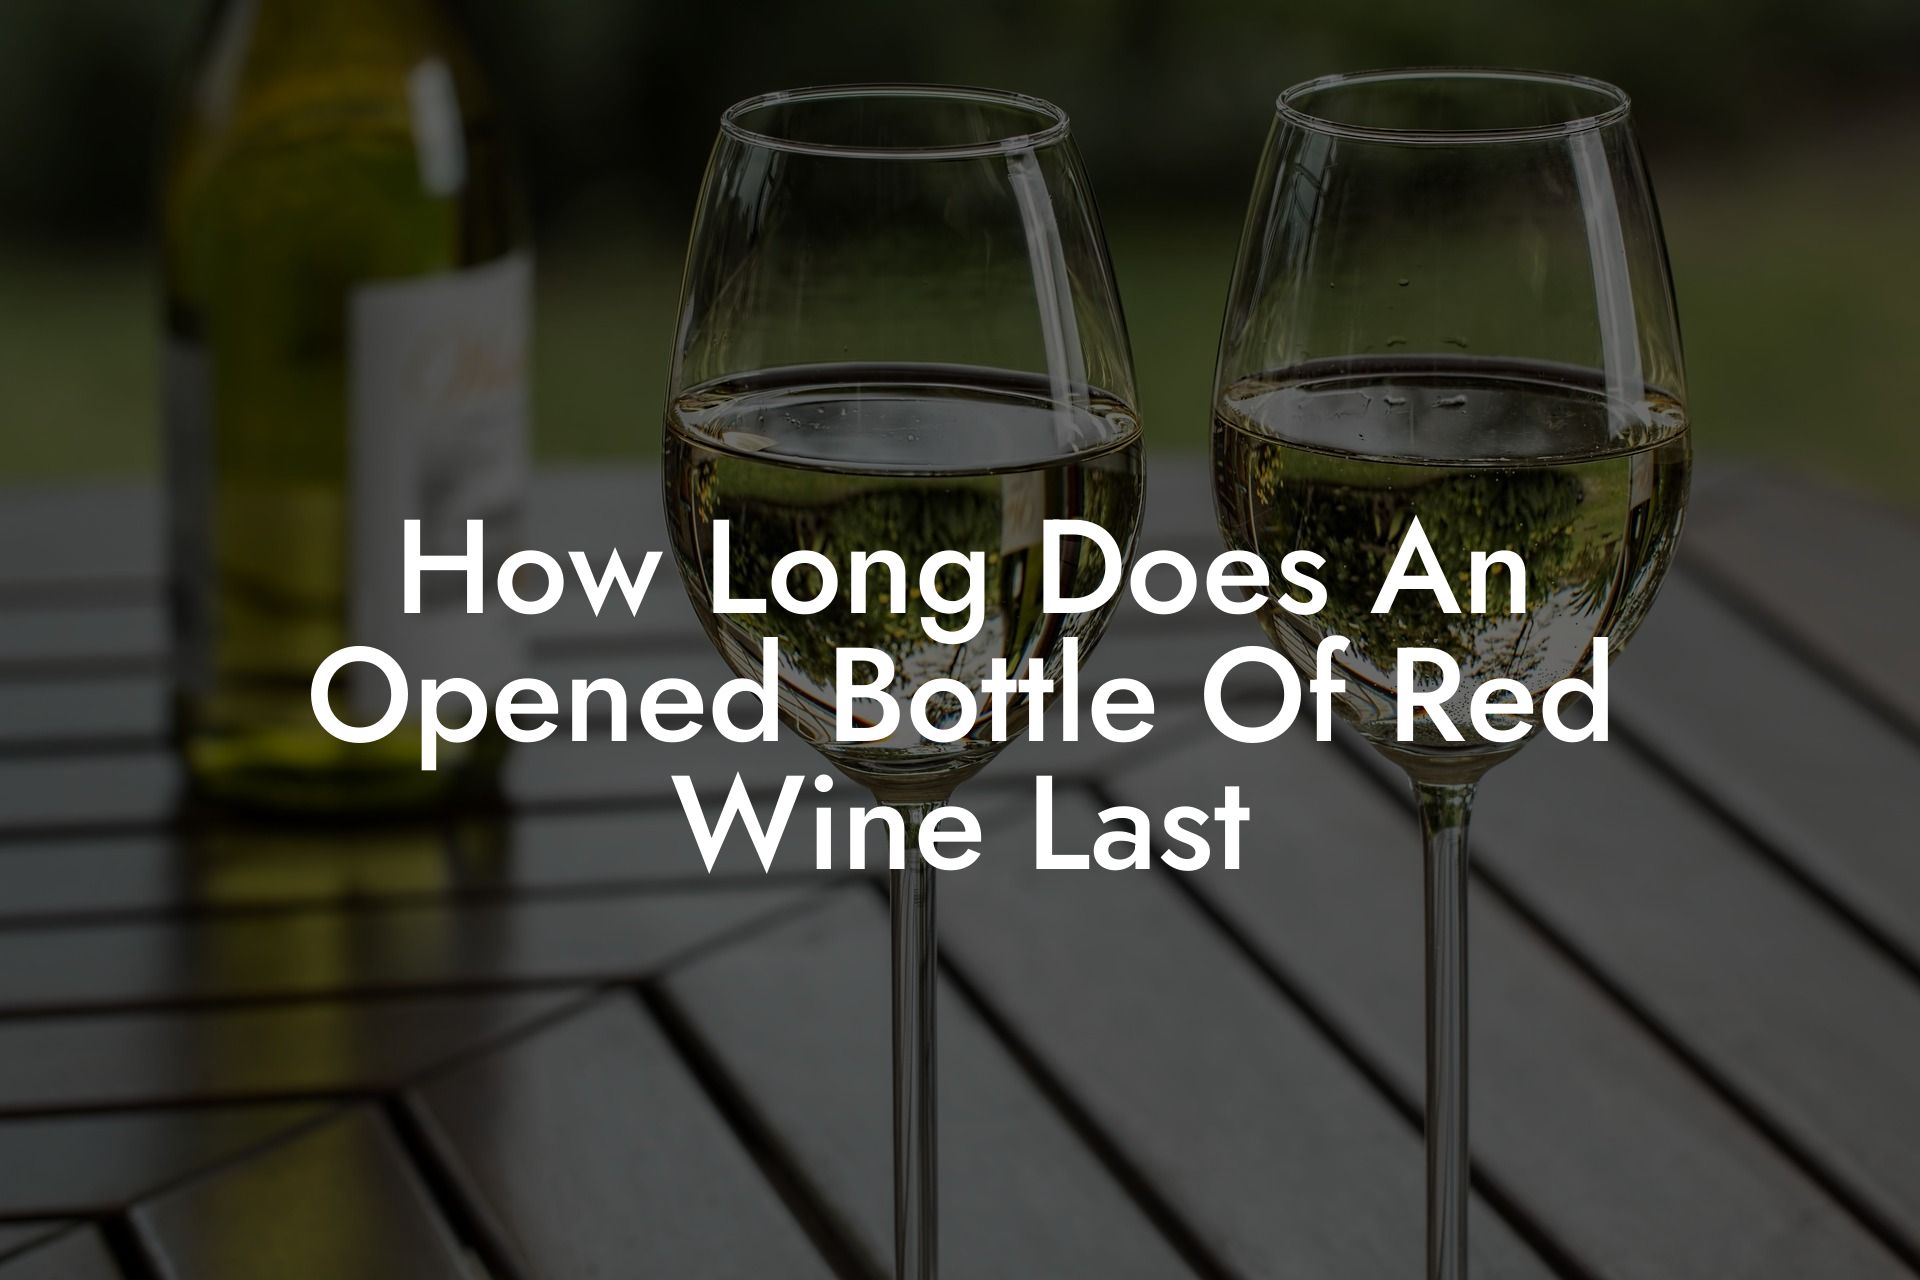 How Long Does An Opened Bottle Of Red Wine Last